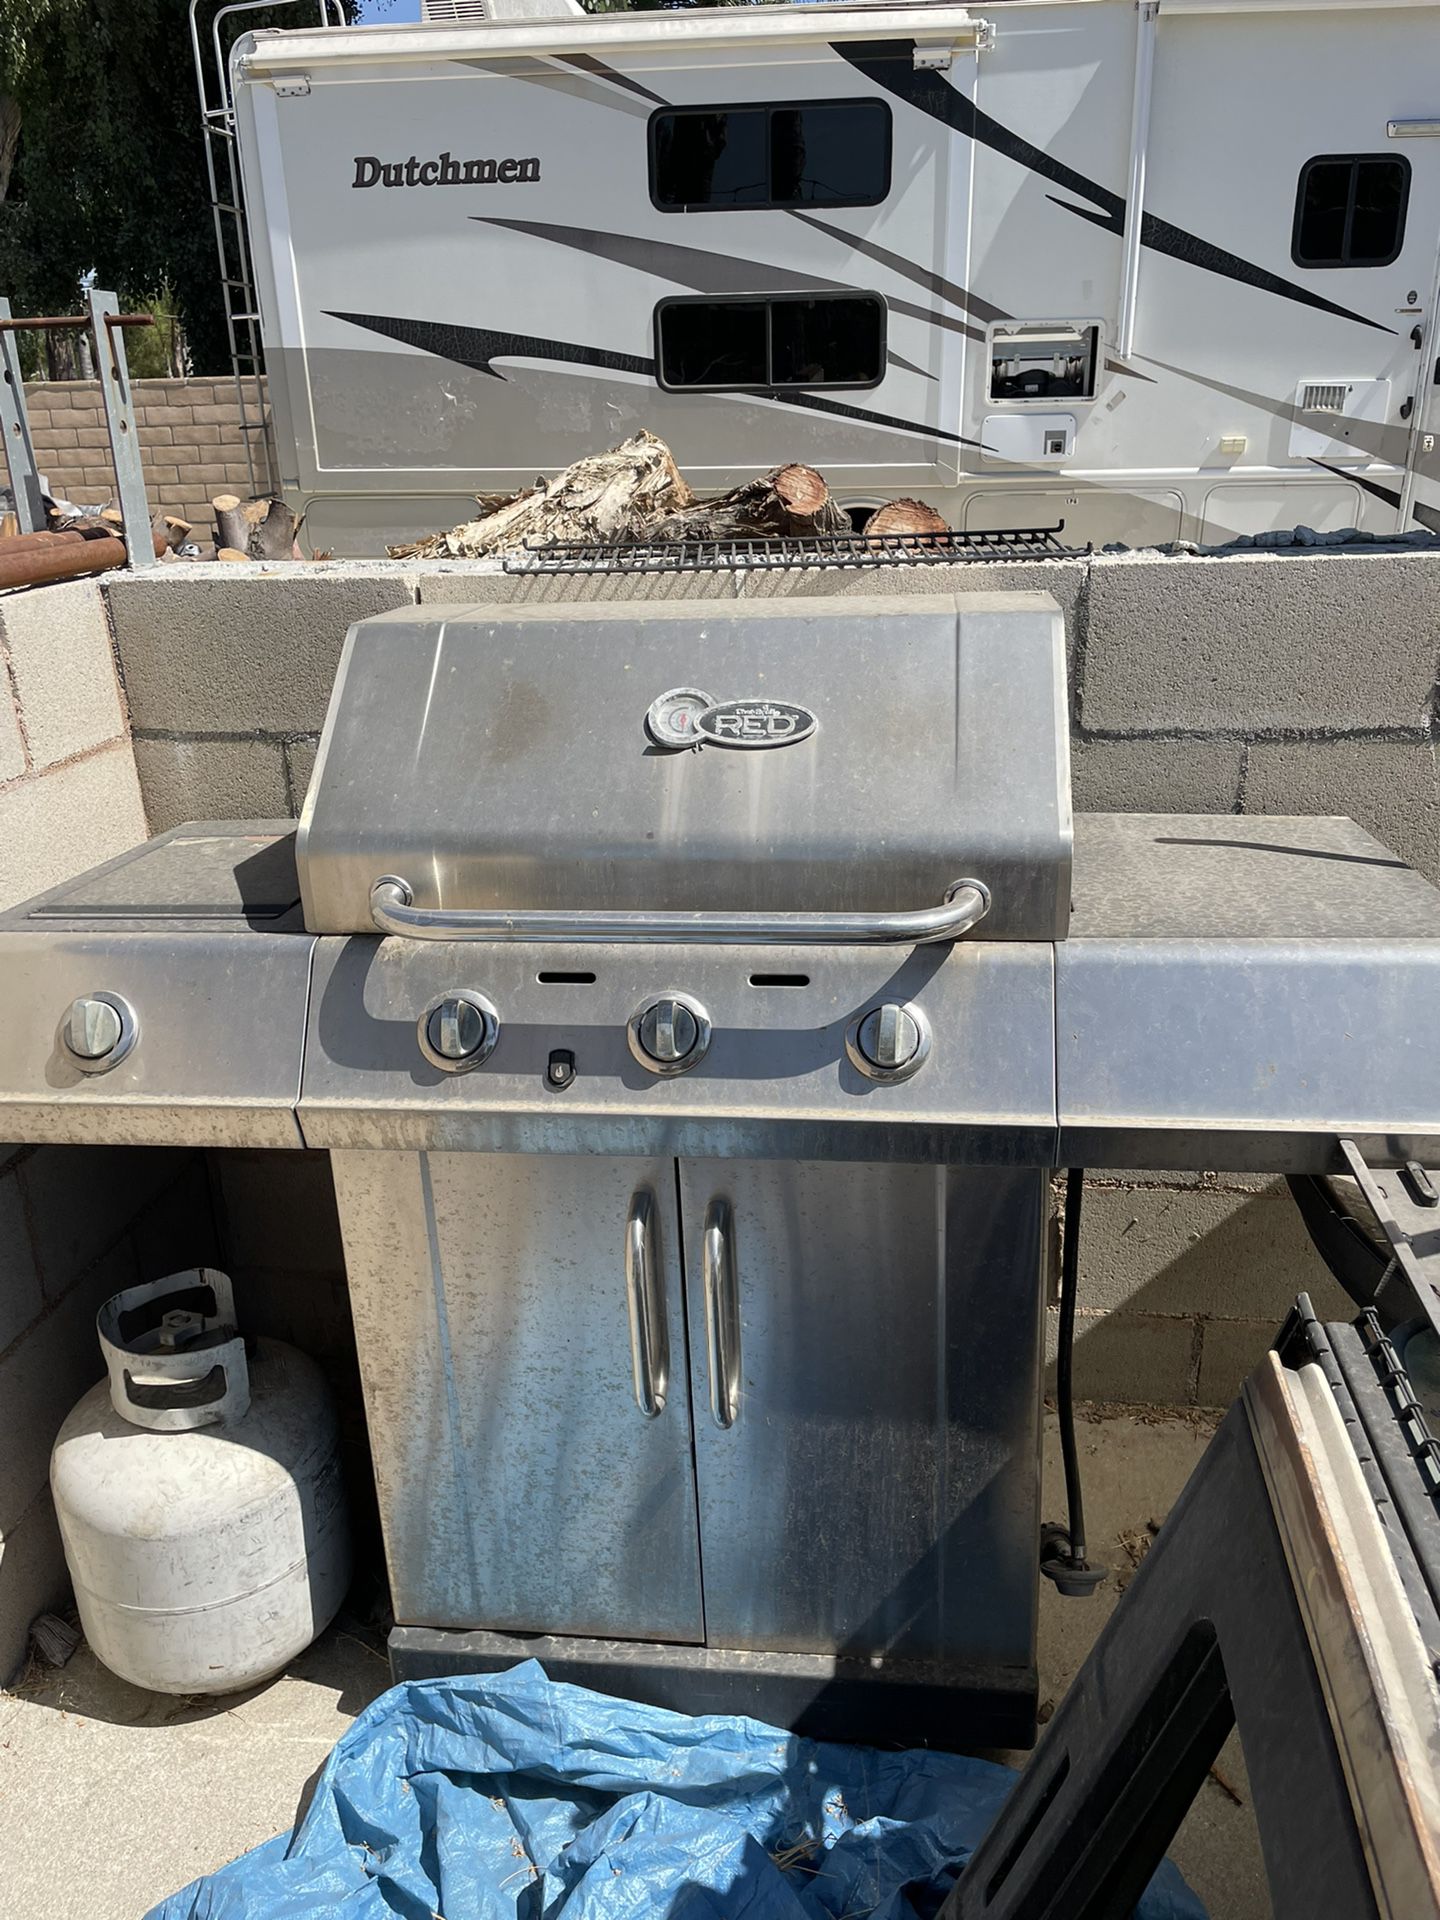 Charbroil Grill 